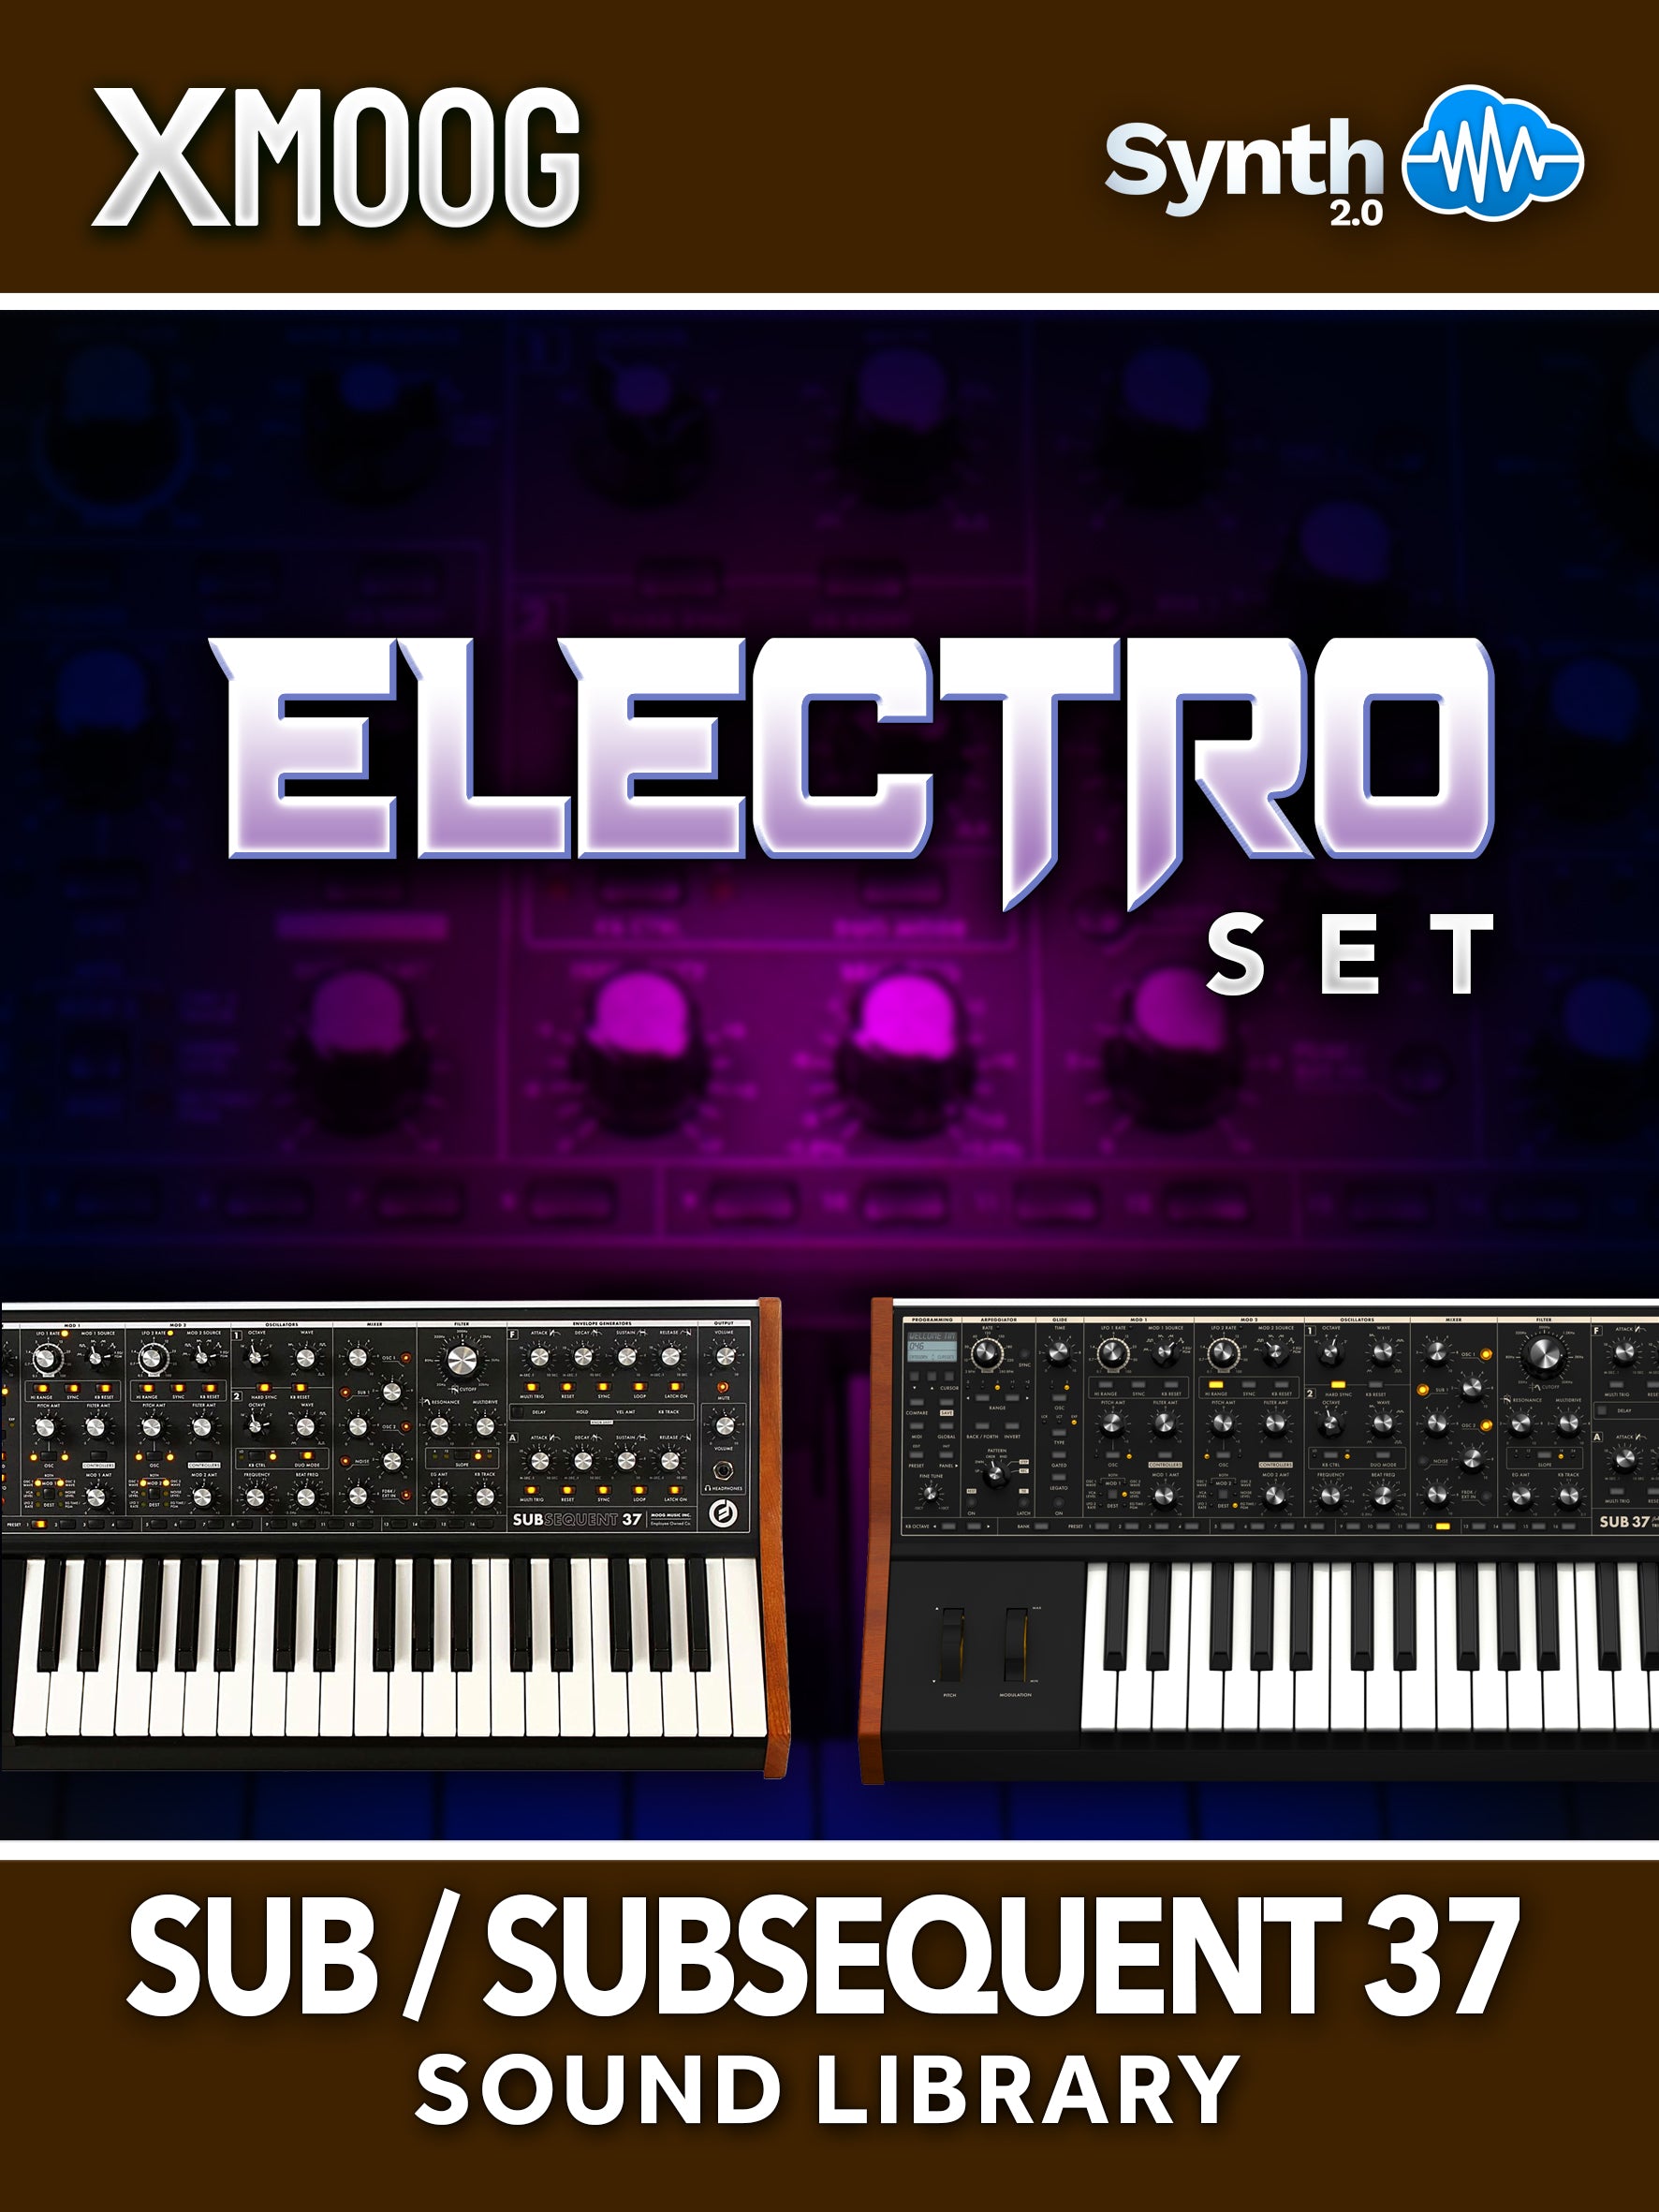 APL016 - Electro Set - Moog Sub 37 / Subsequent 37 ( 52 presets )